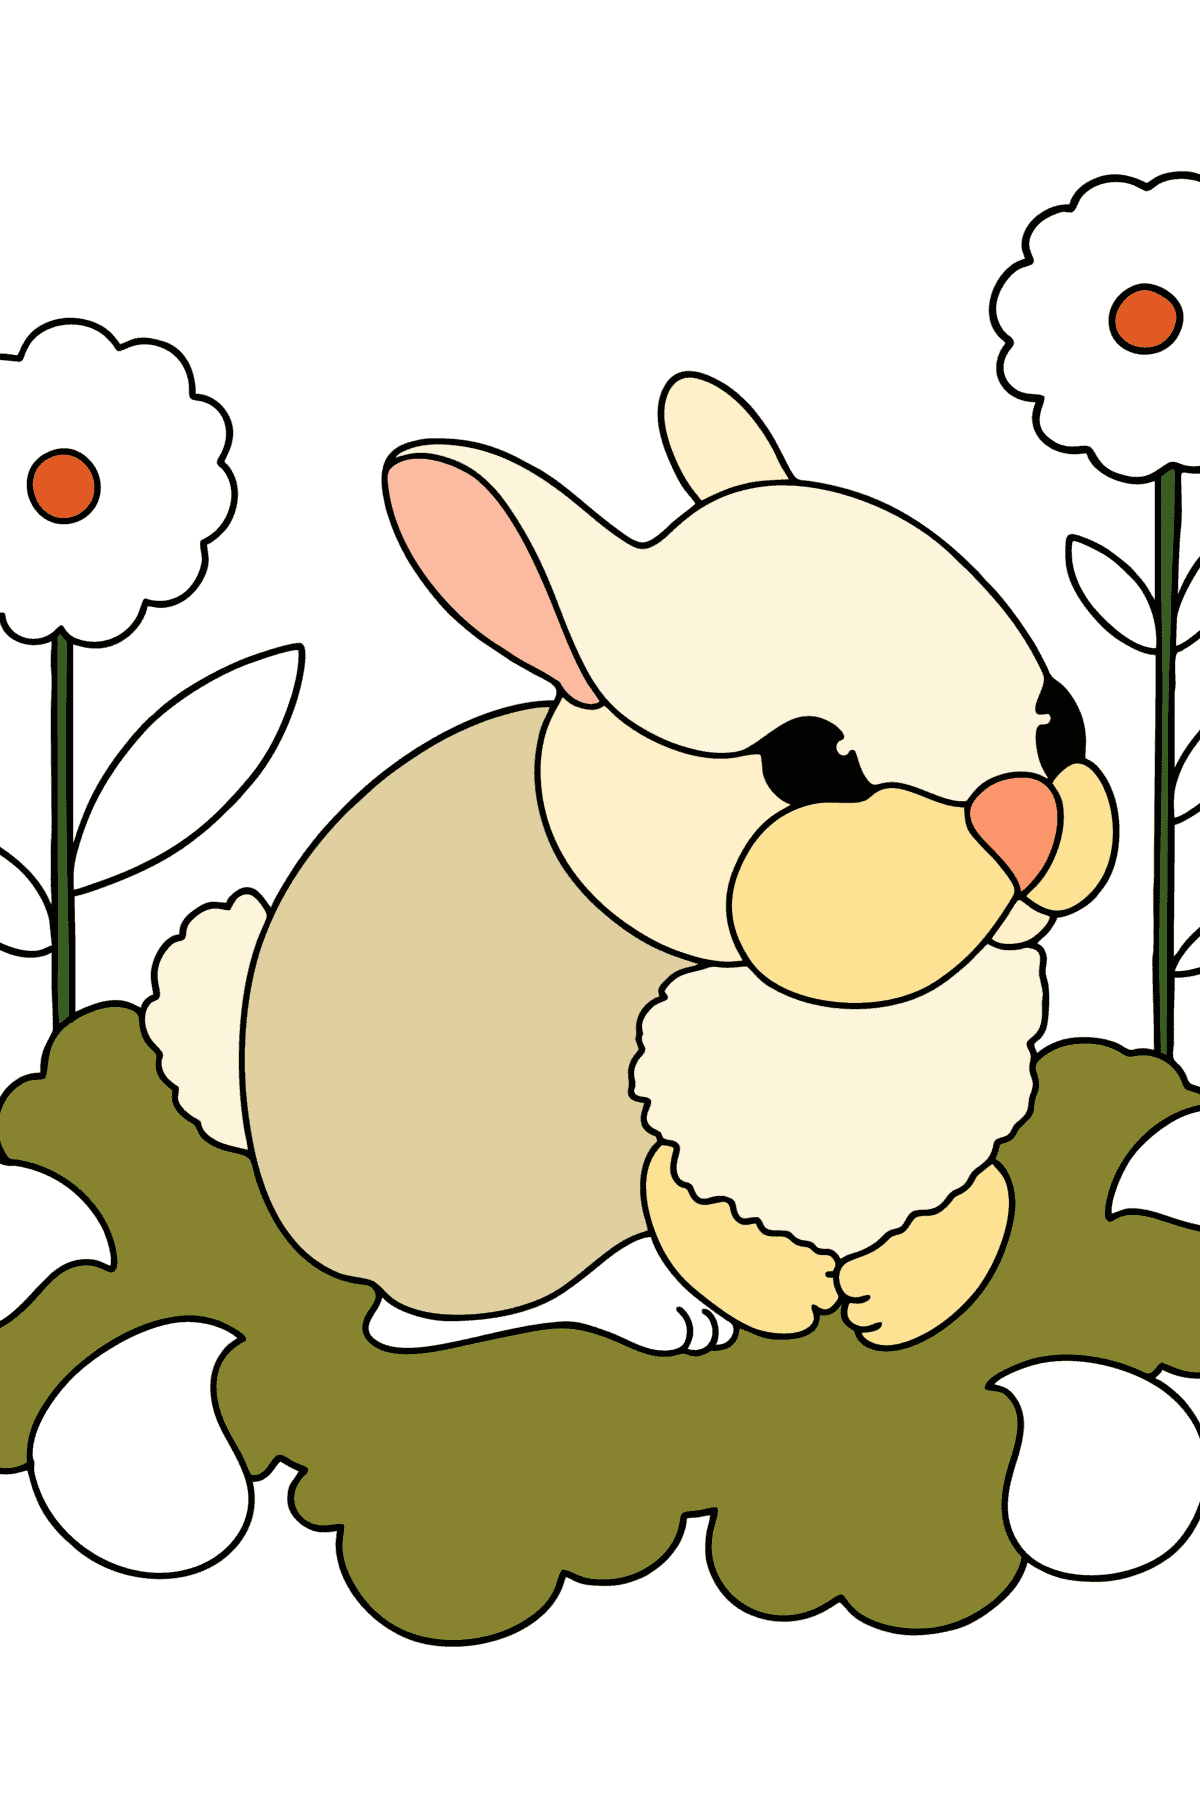 Baby Bunny Coloring page - Coloring Pages for Kids